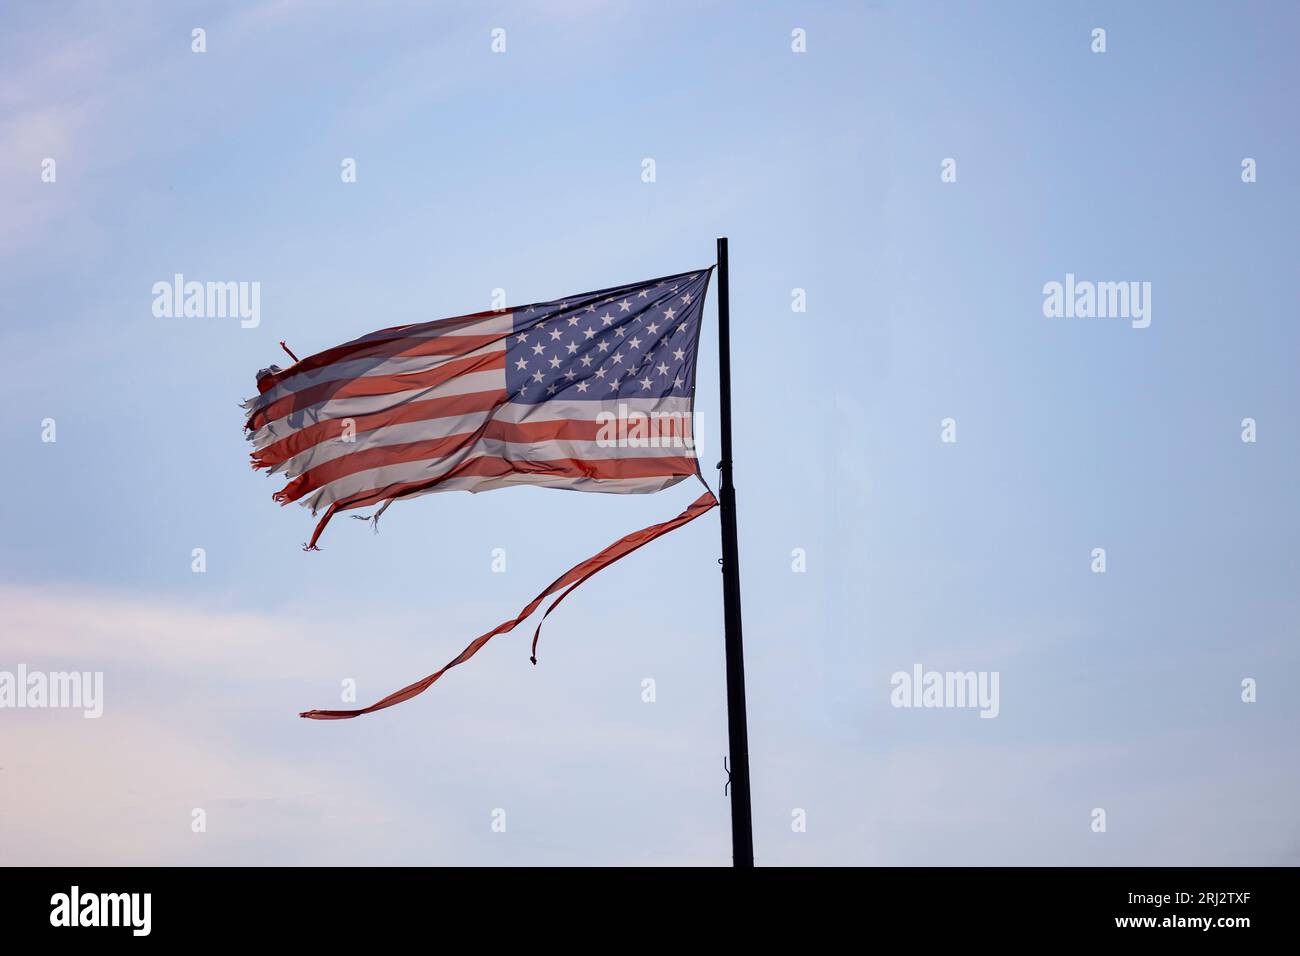 A Weathered and Torn American Flag blowing in the wind Stock Photo